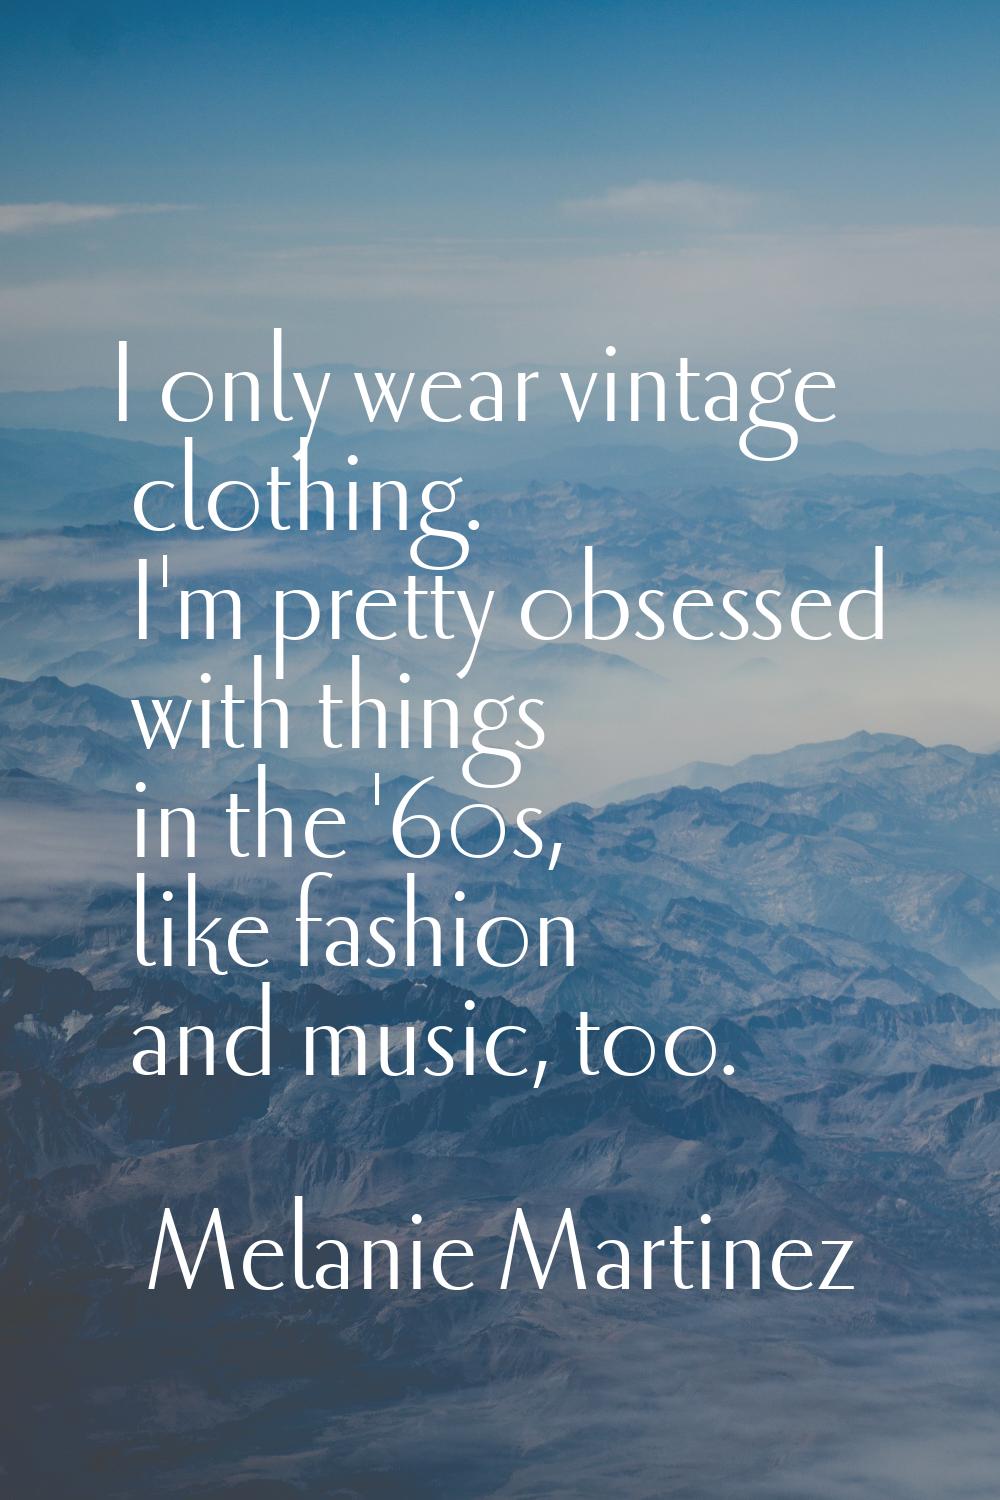 I only wear vintage clothing. I'm pretty obsessed with things in the '60s, like fashion and music, 